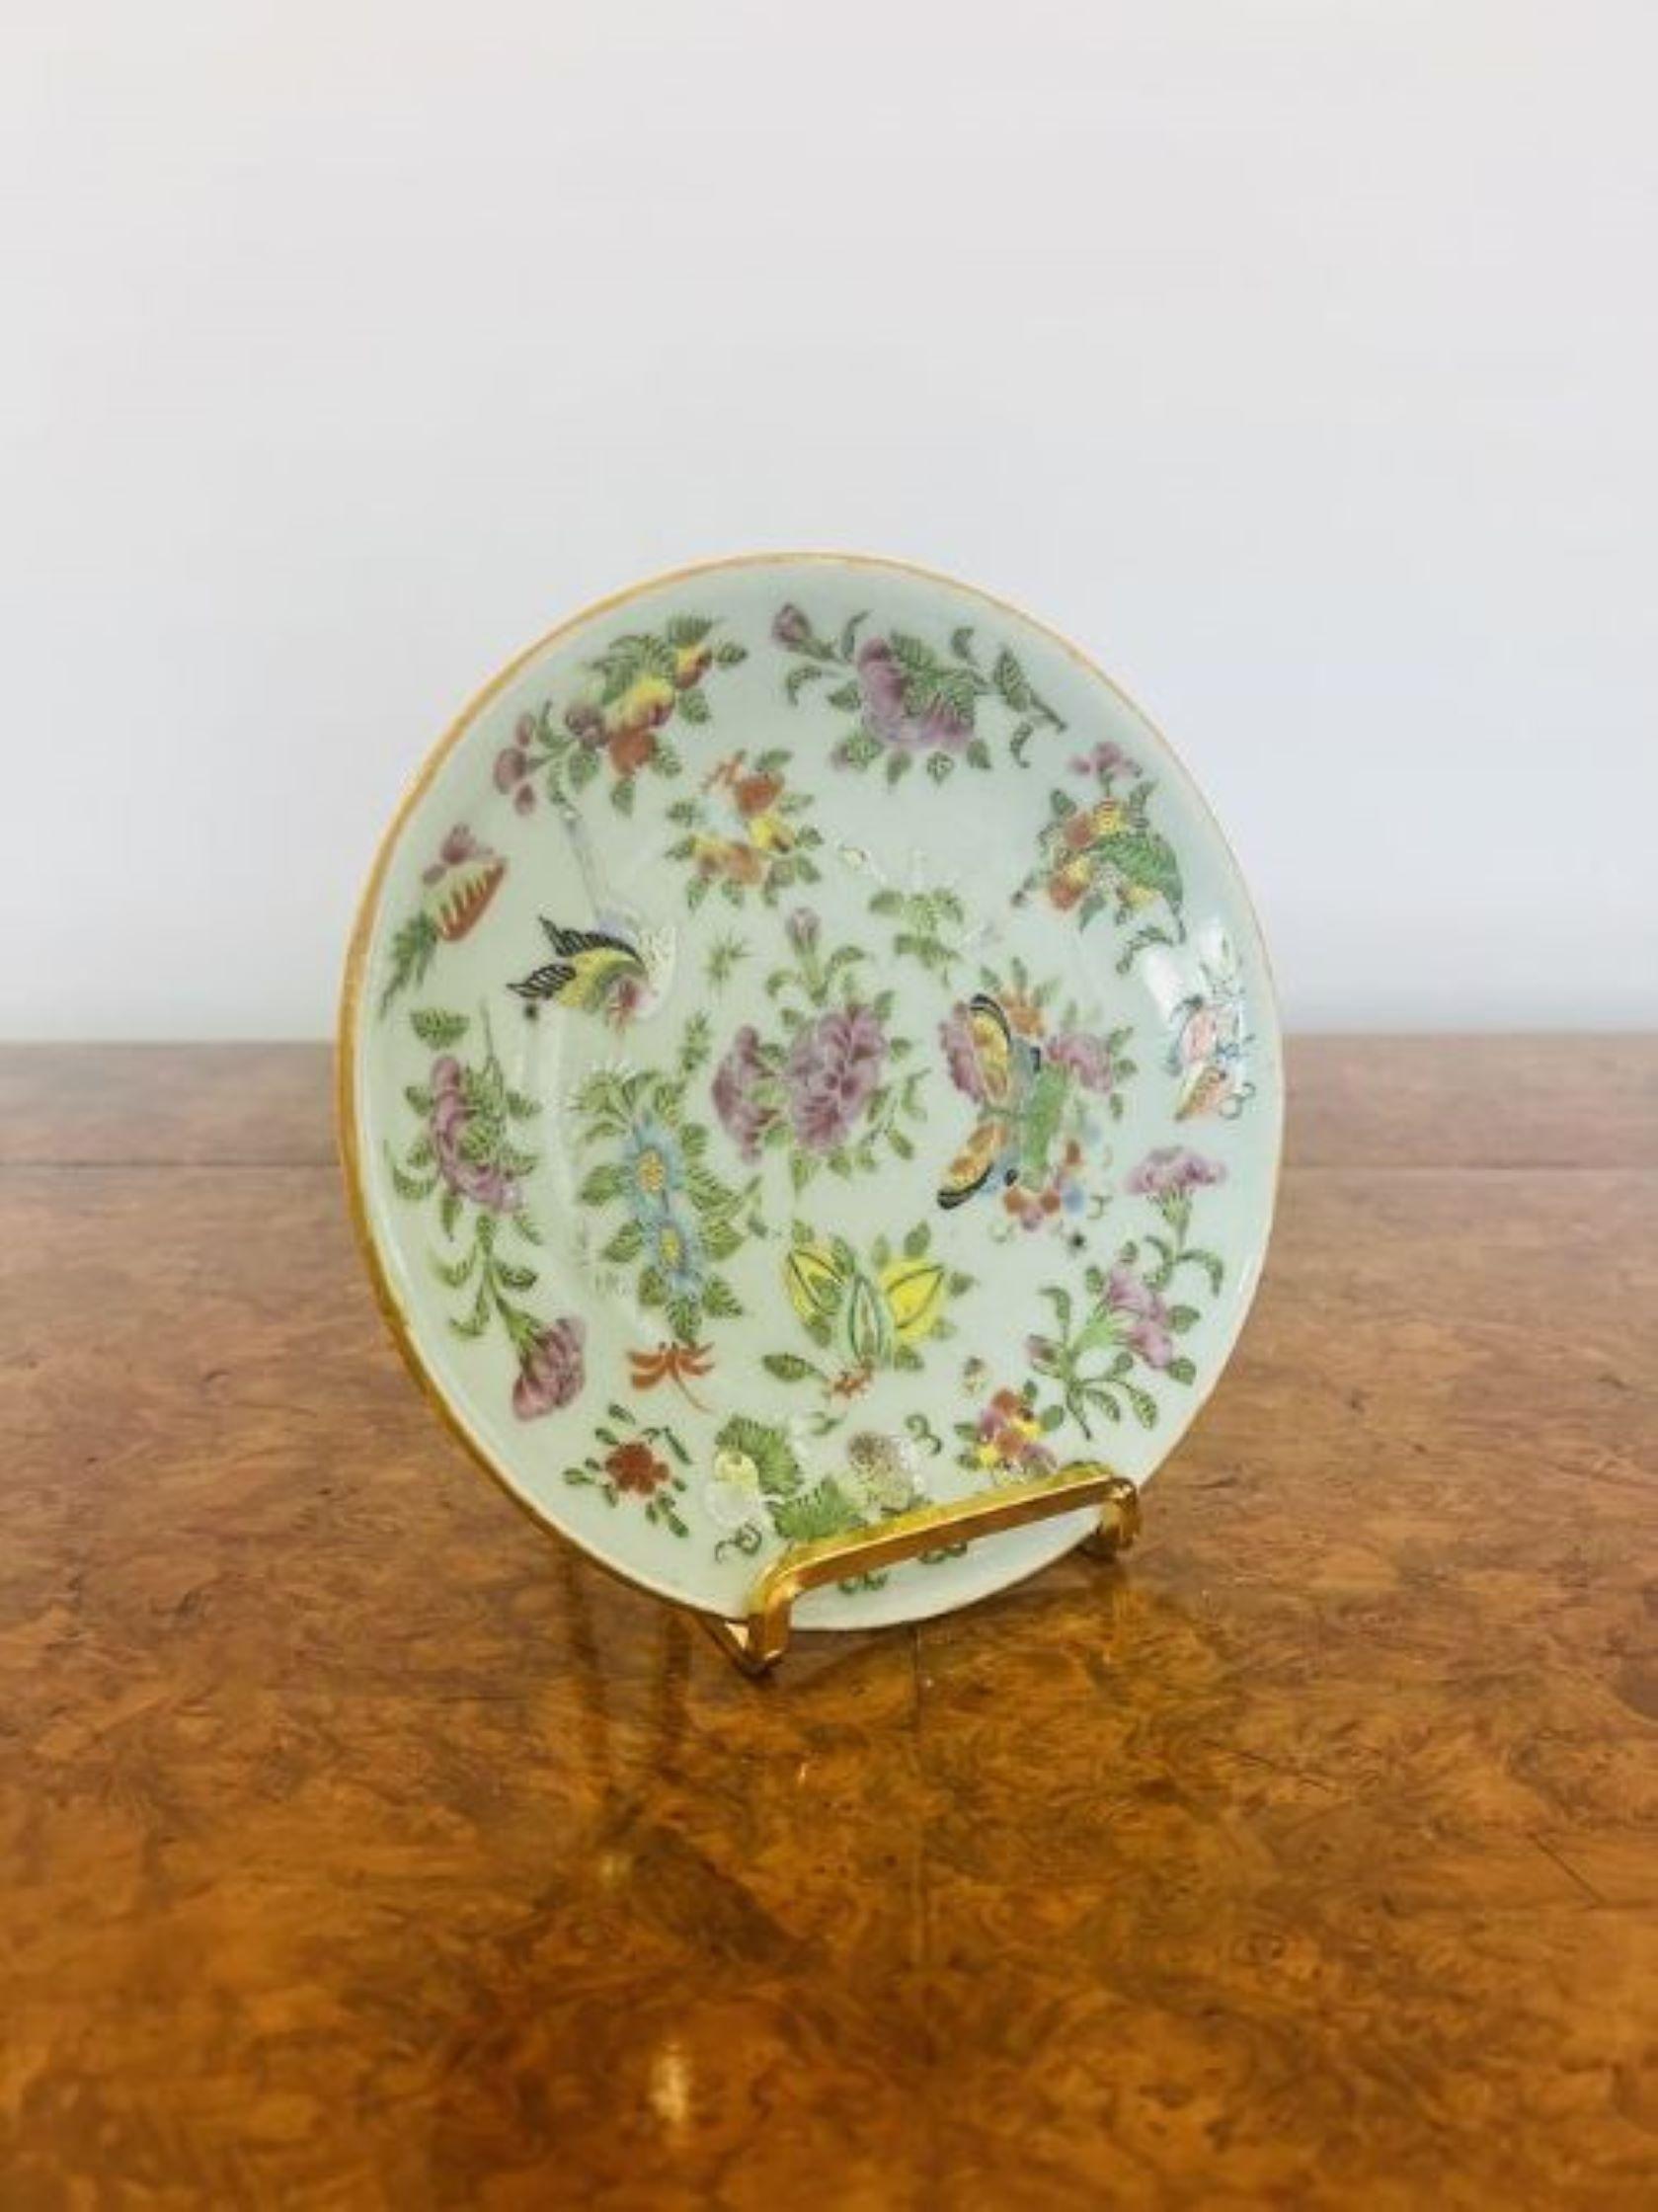 Small antique Chinese Celadon Famille vert plate having a lovely small antique Chinese plate hand painted with wonderful flowers, birds and insects in stunning green, yellow, pink and blue colours. 

D. 1830